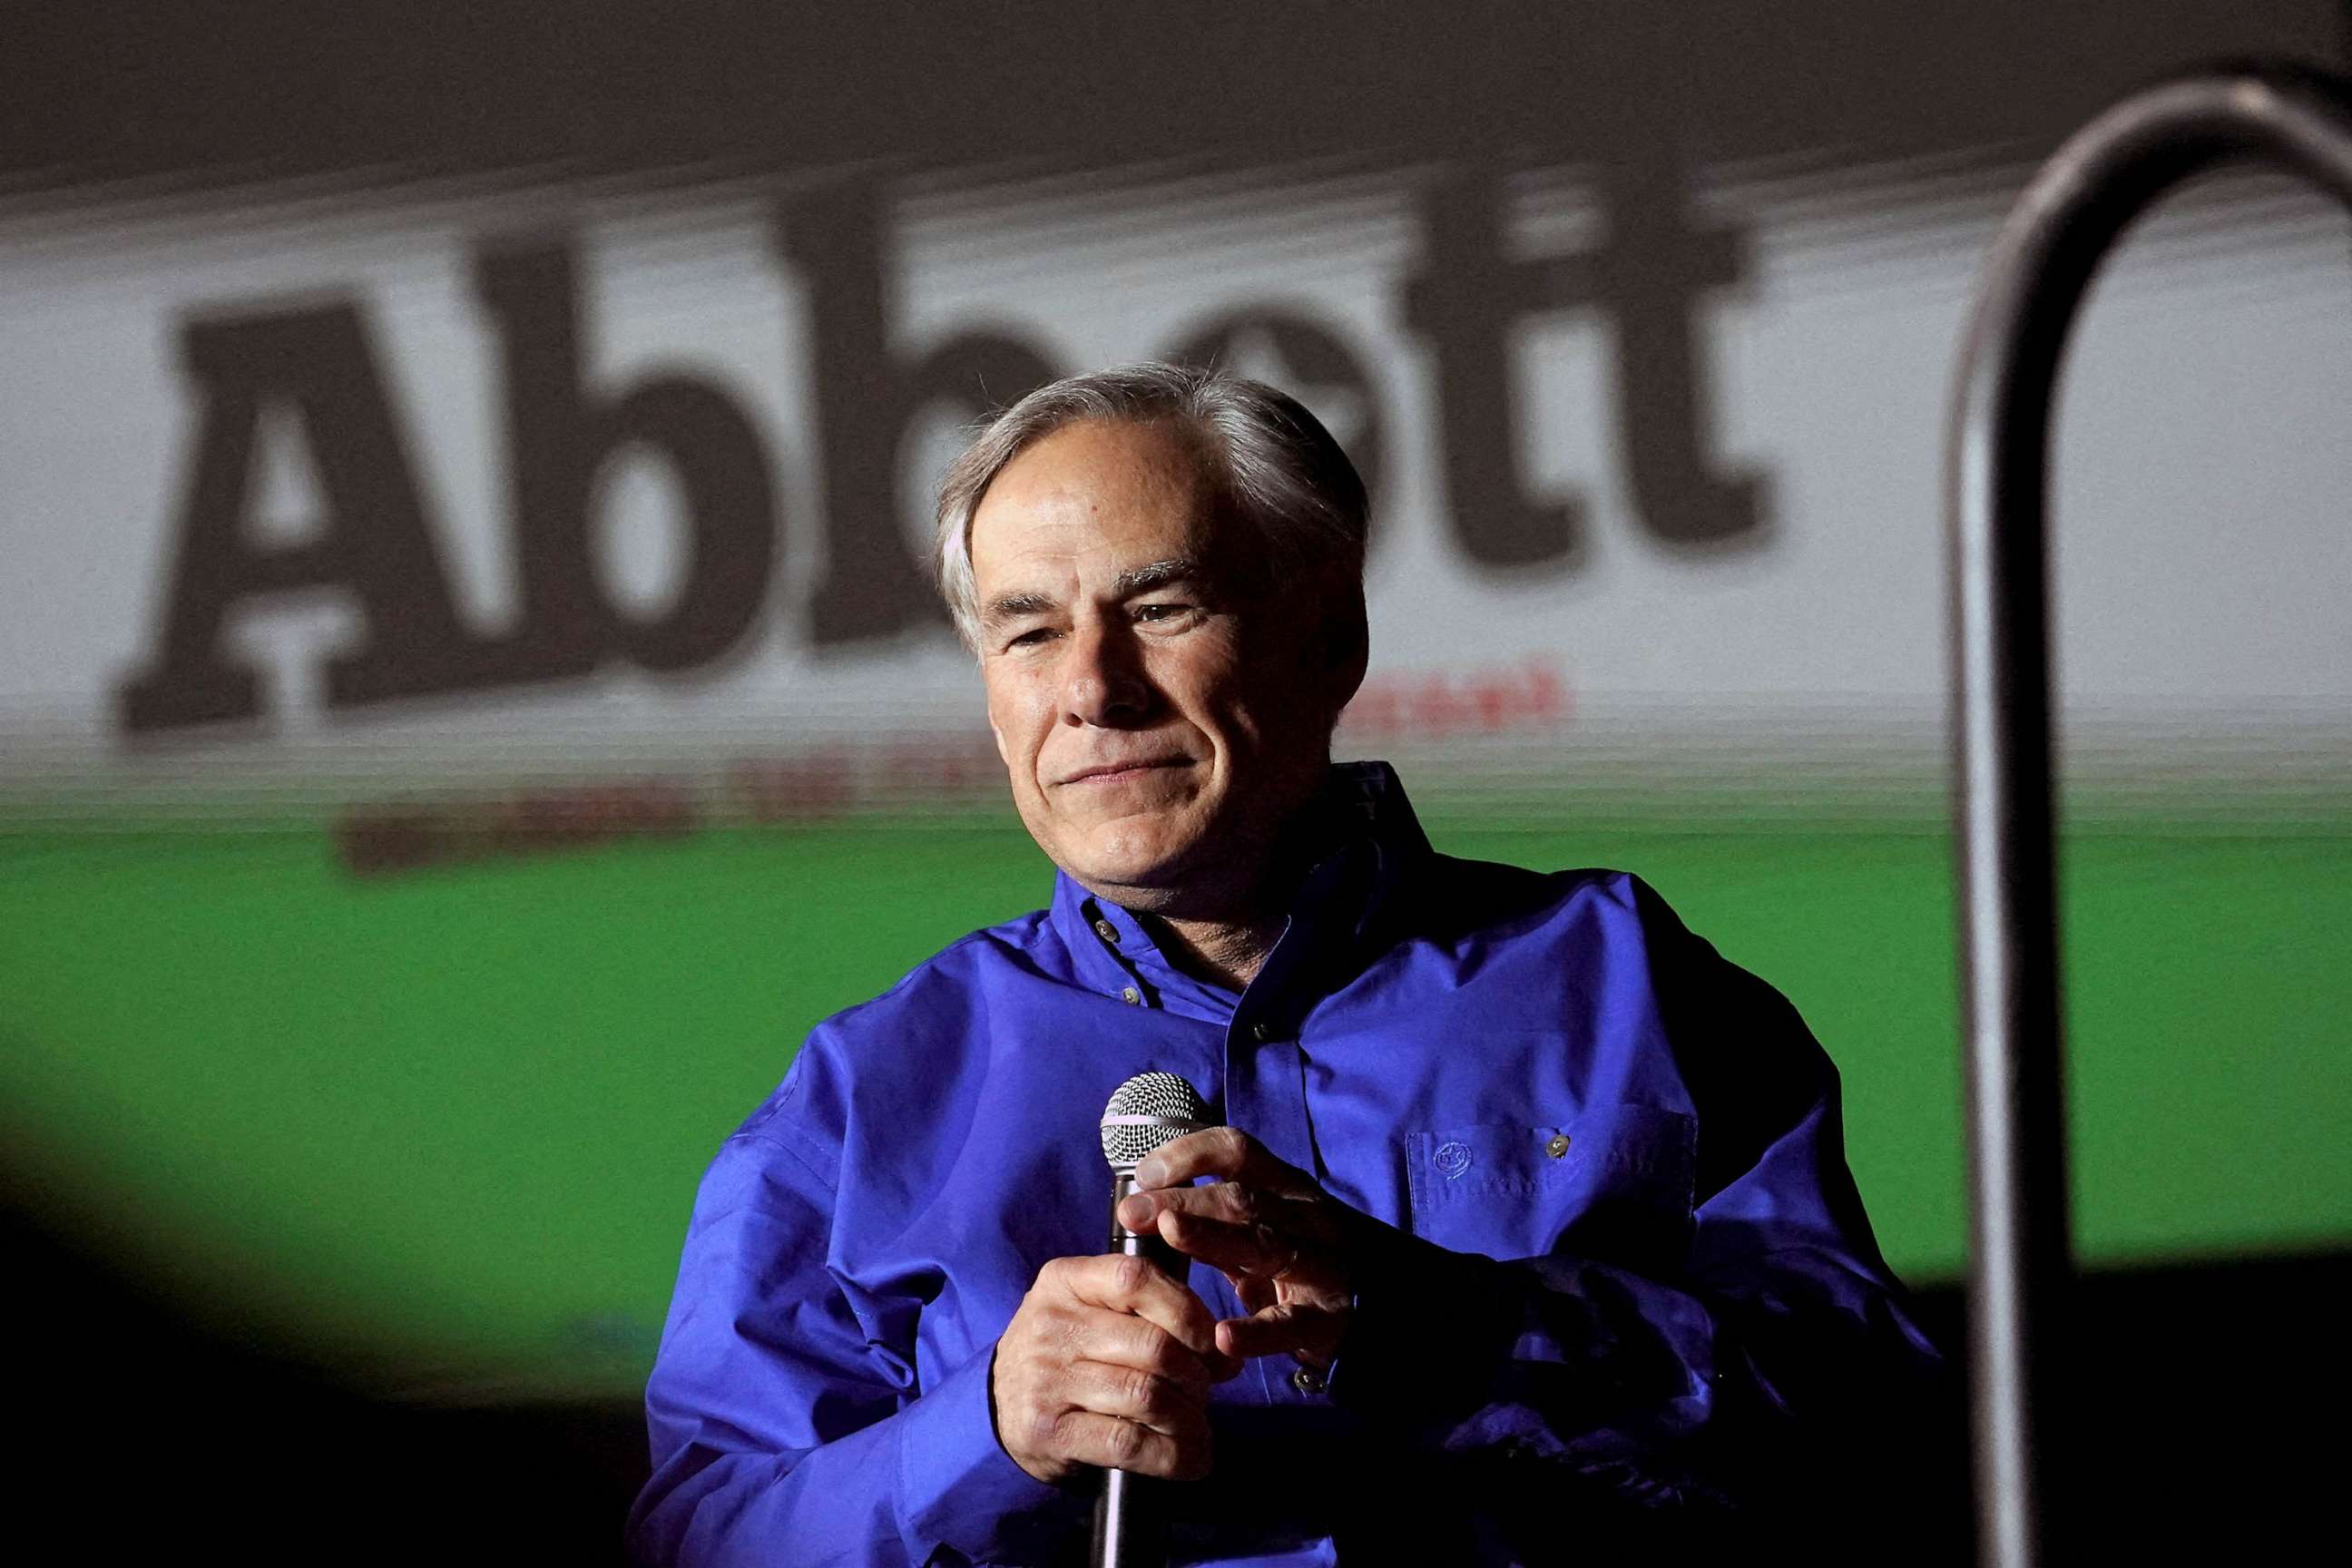 PHOTO: FILE - Texas Governor Greg Abbott speaks during a rally, in Conroe, Texas, Jan. 29, 2022.